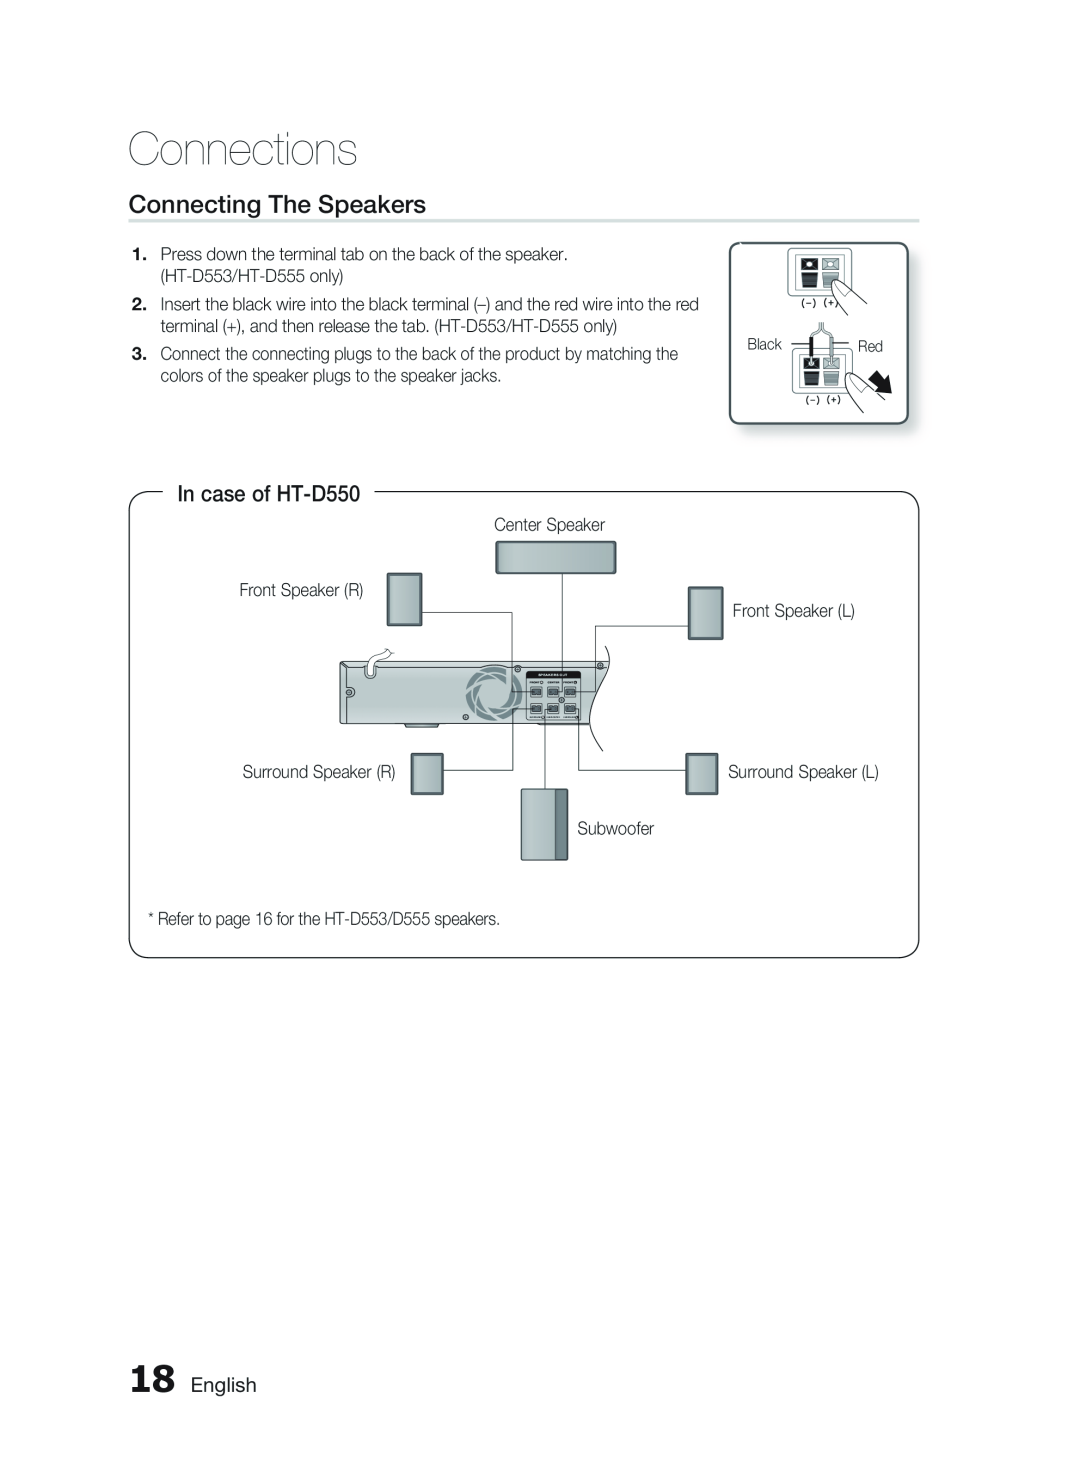 Samsung HT-D553, HT-D555 user manual Connecting The Speakers, In case of HT-D550, English, Connections 